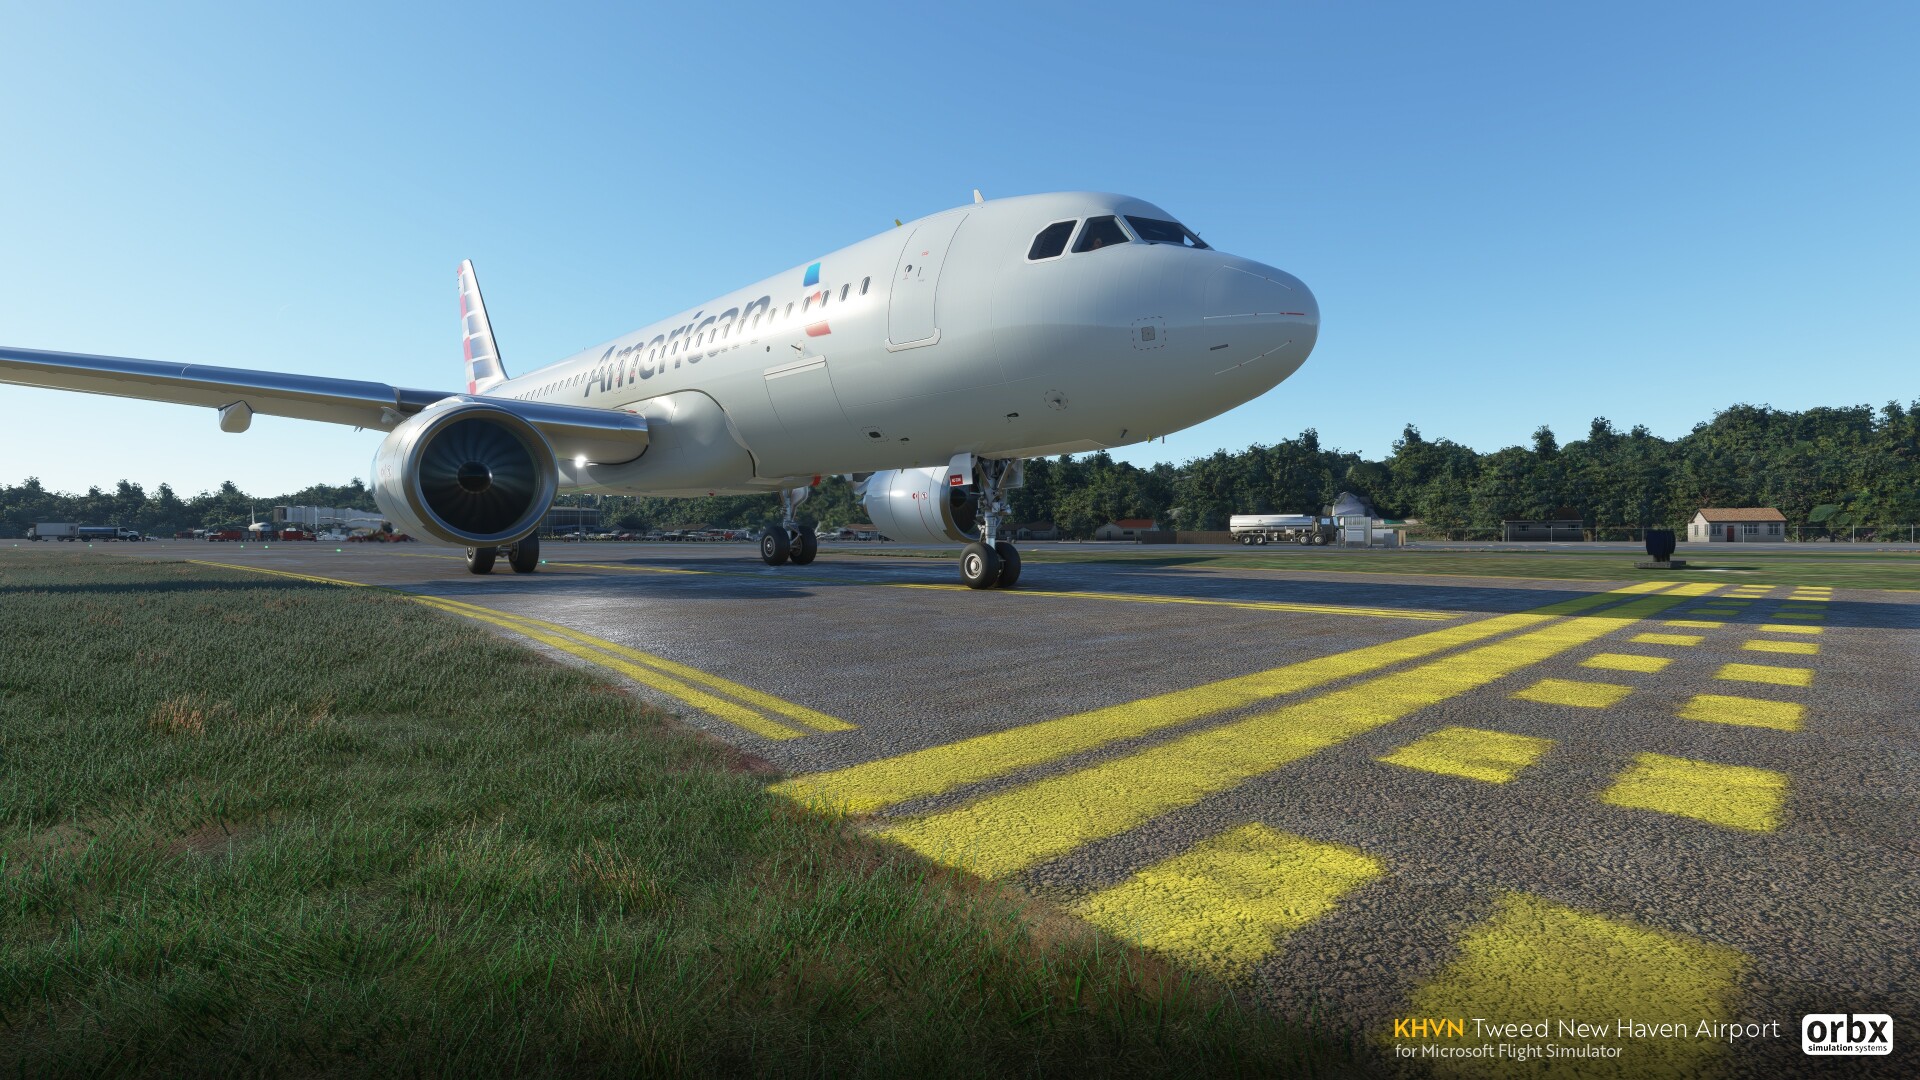 Khvn Tweed New Haven Airport Msfs My Final Shots Orbx Preview Announcements Screenshots And